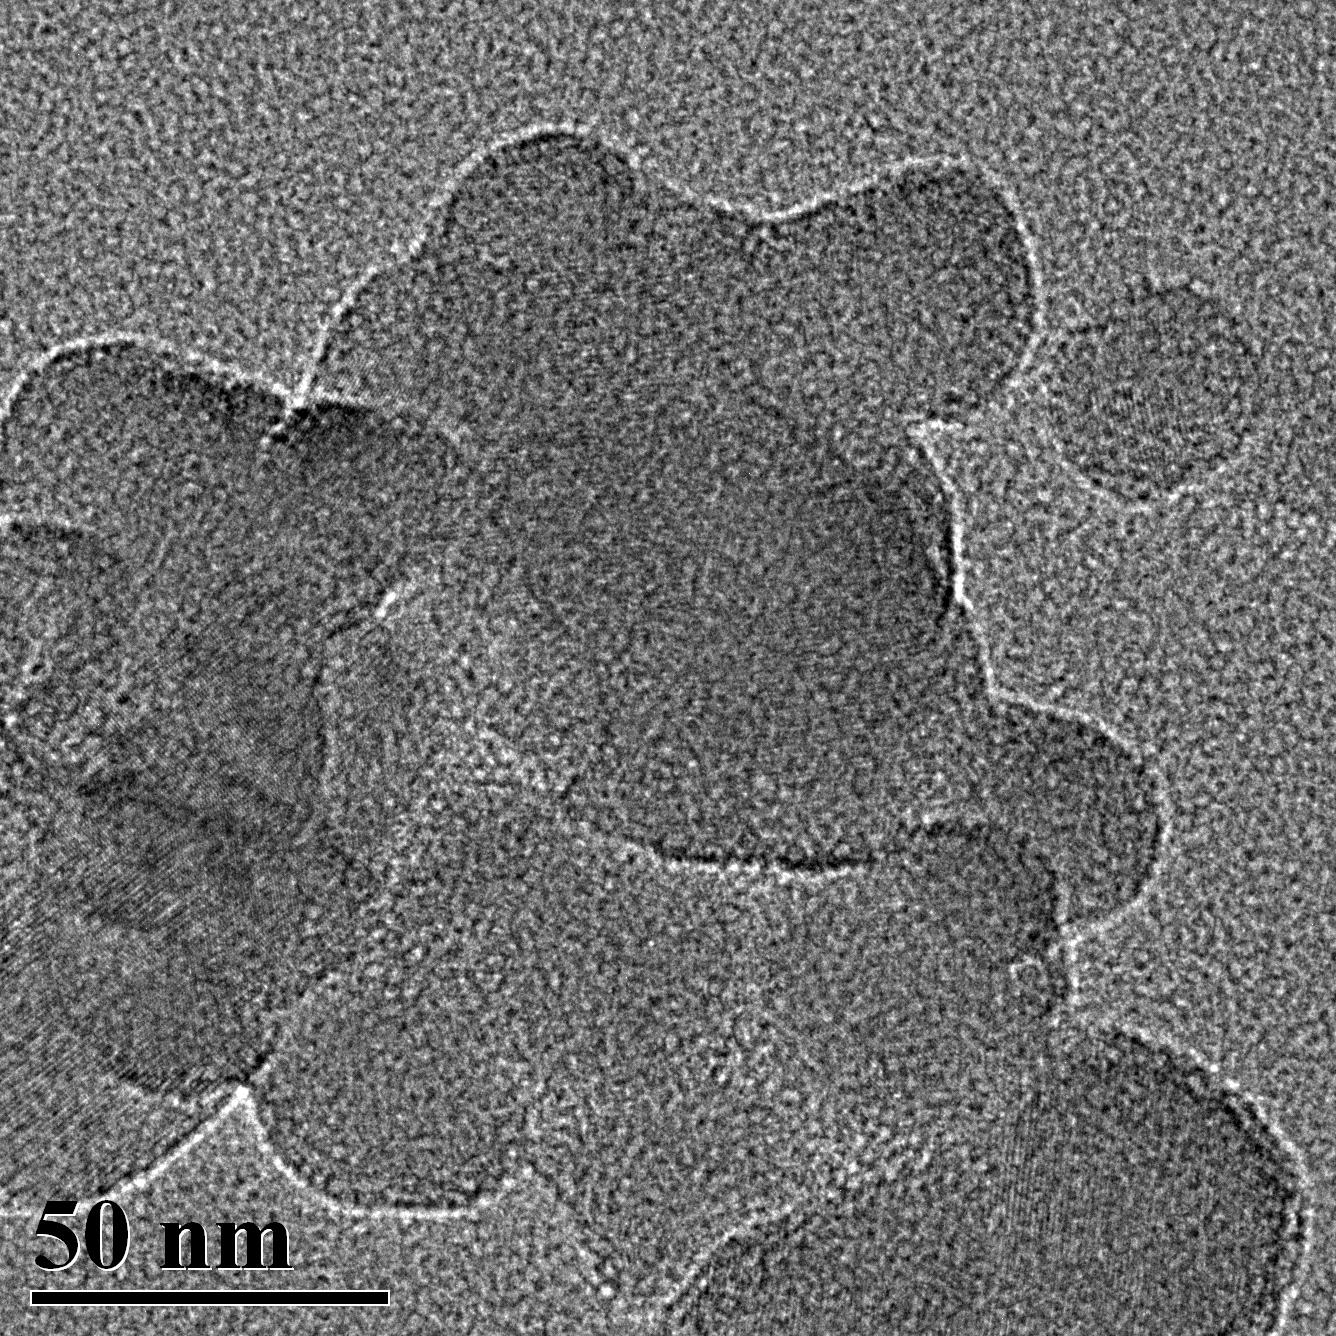 Typical TEM Image of ACS Material Fullerene C60 (Type A)